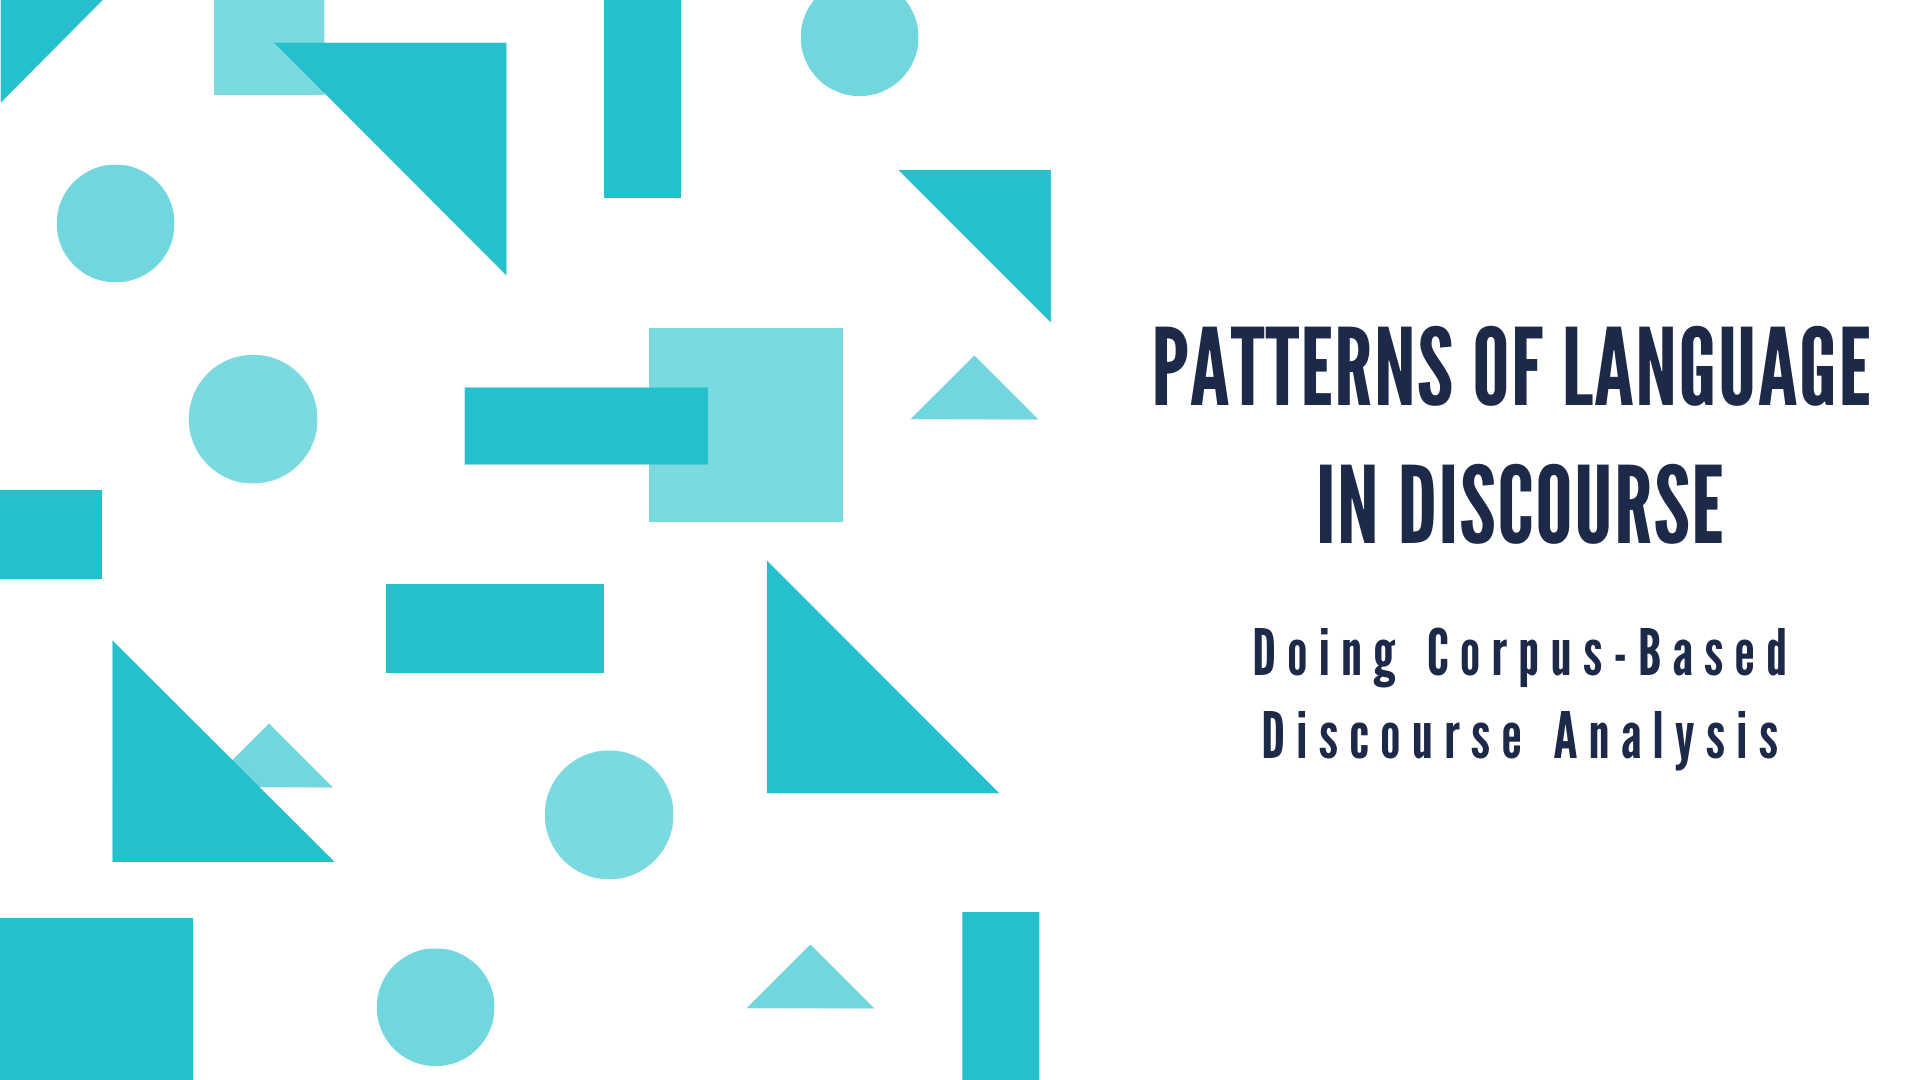 Patterns of Language in Discourse: Doing Corpus-Based Discourse Analysis